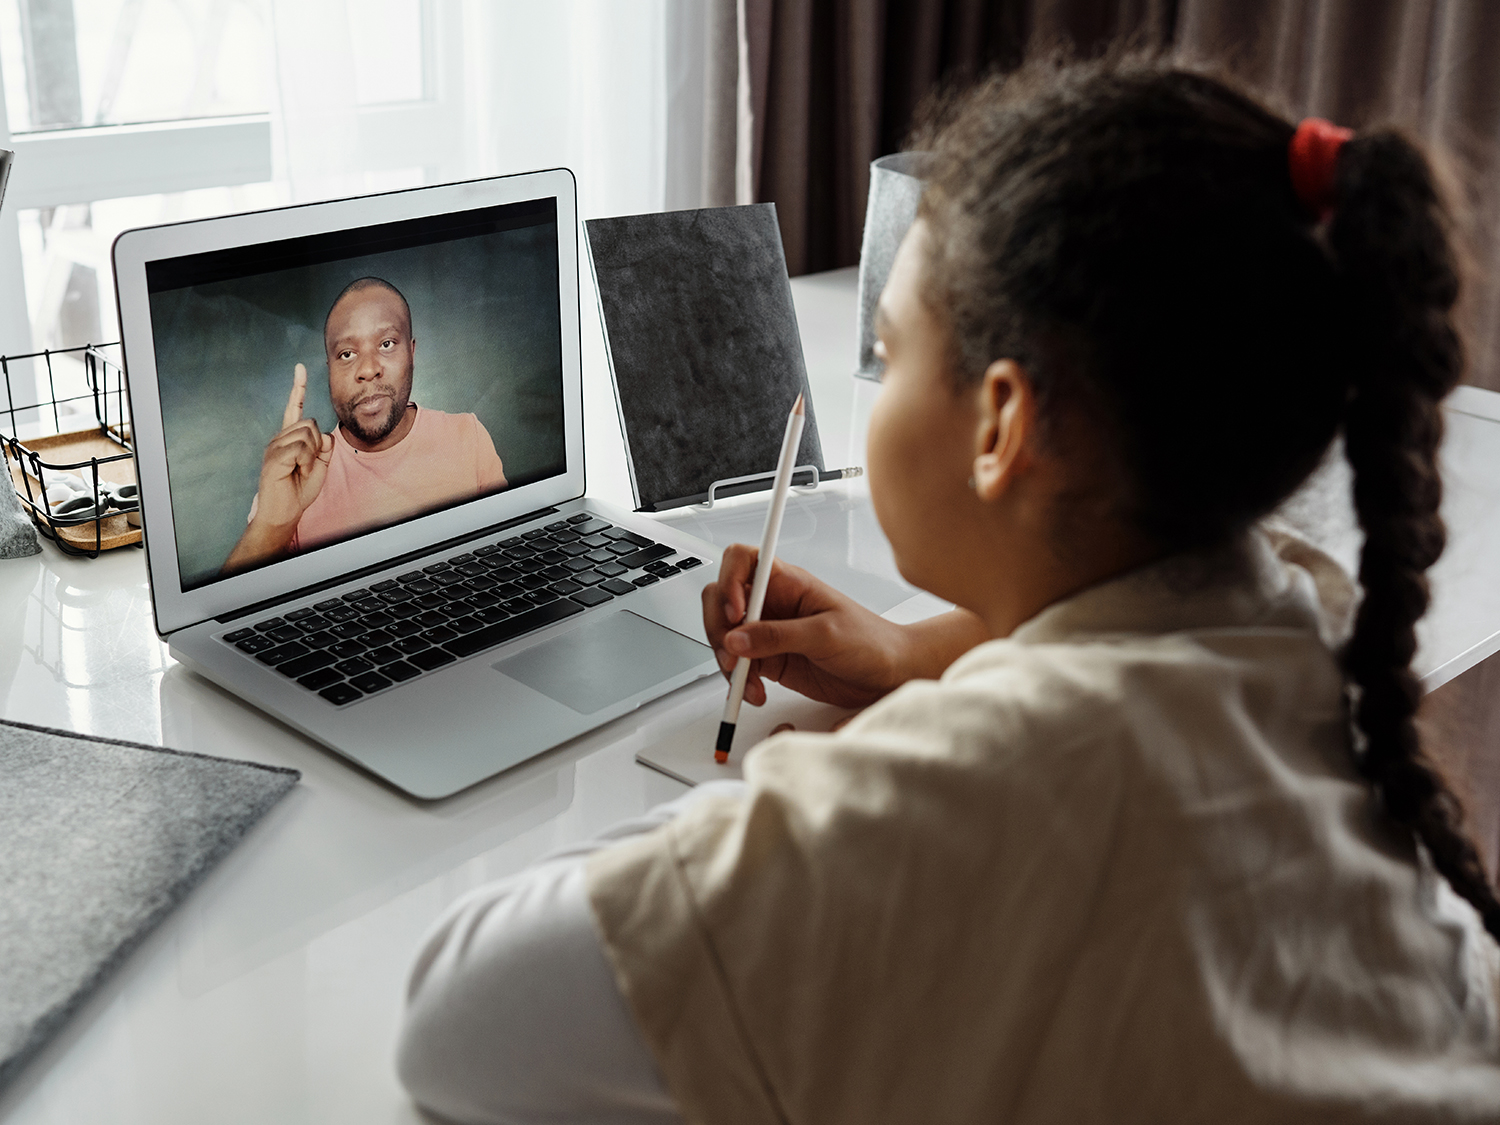 Long-distance learning could help us democratize education